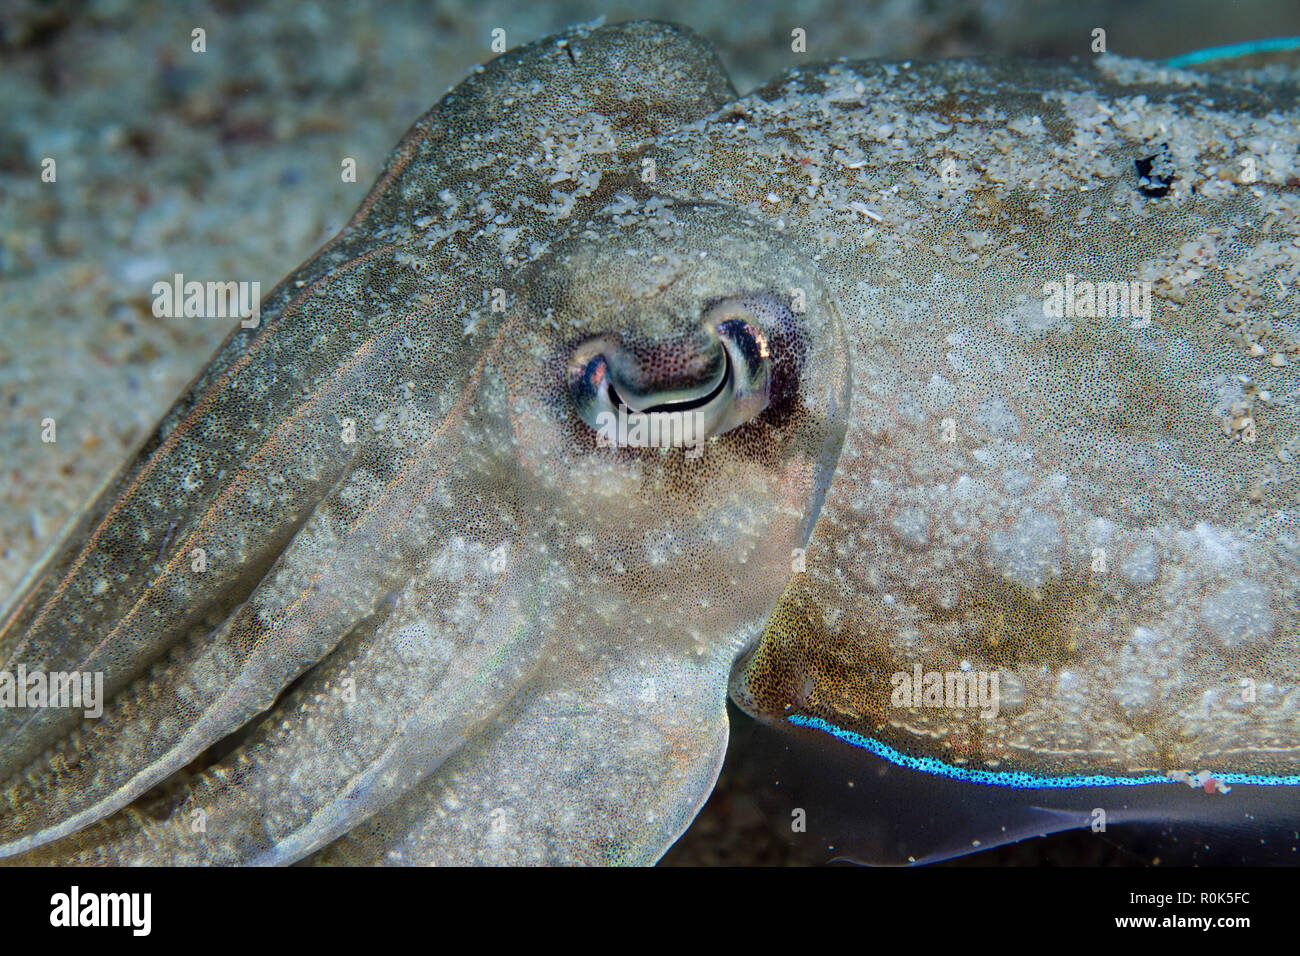 Close-up view of the face of a broadclub cuttlefish, Philippines. Stock Photo